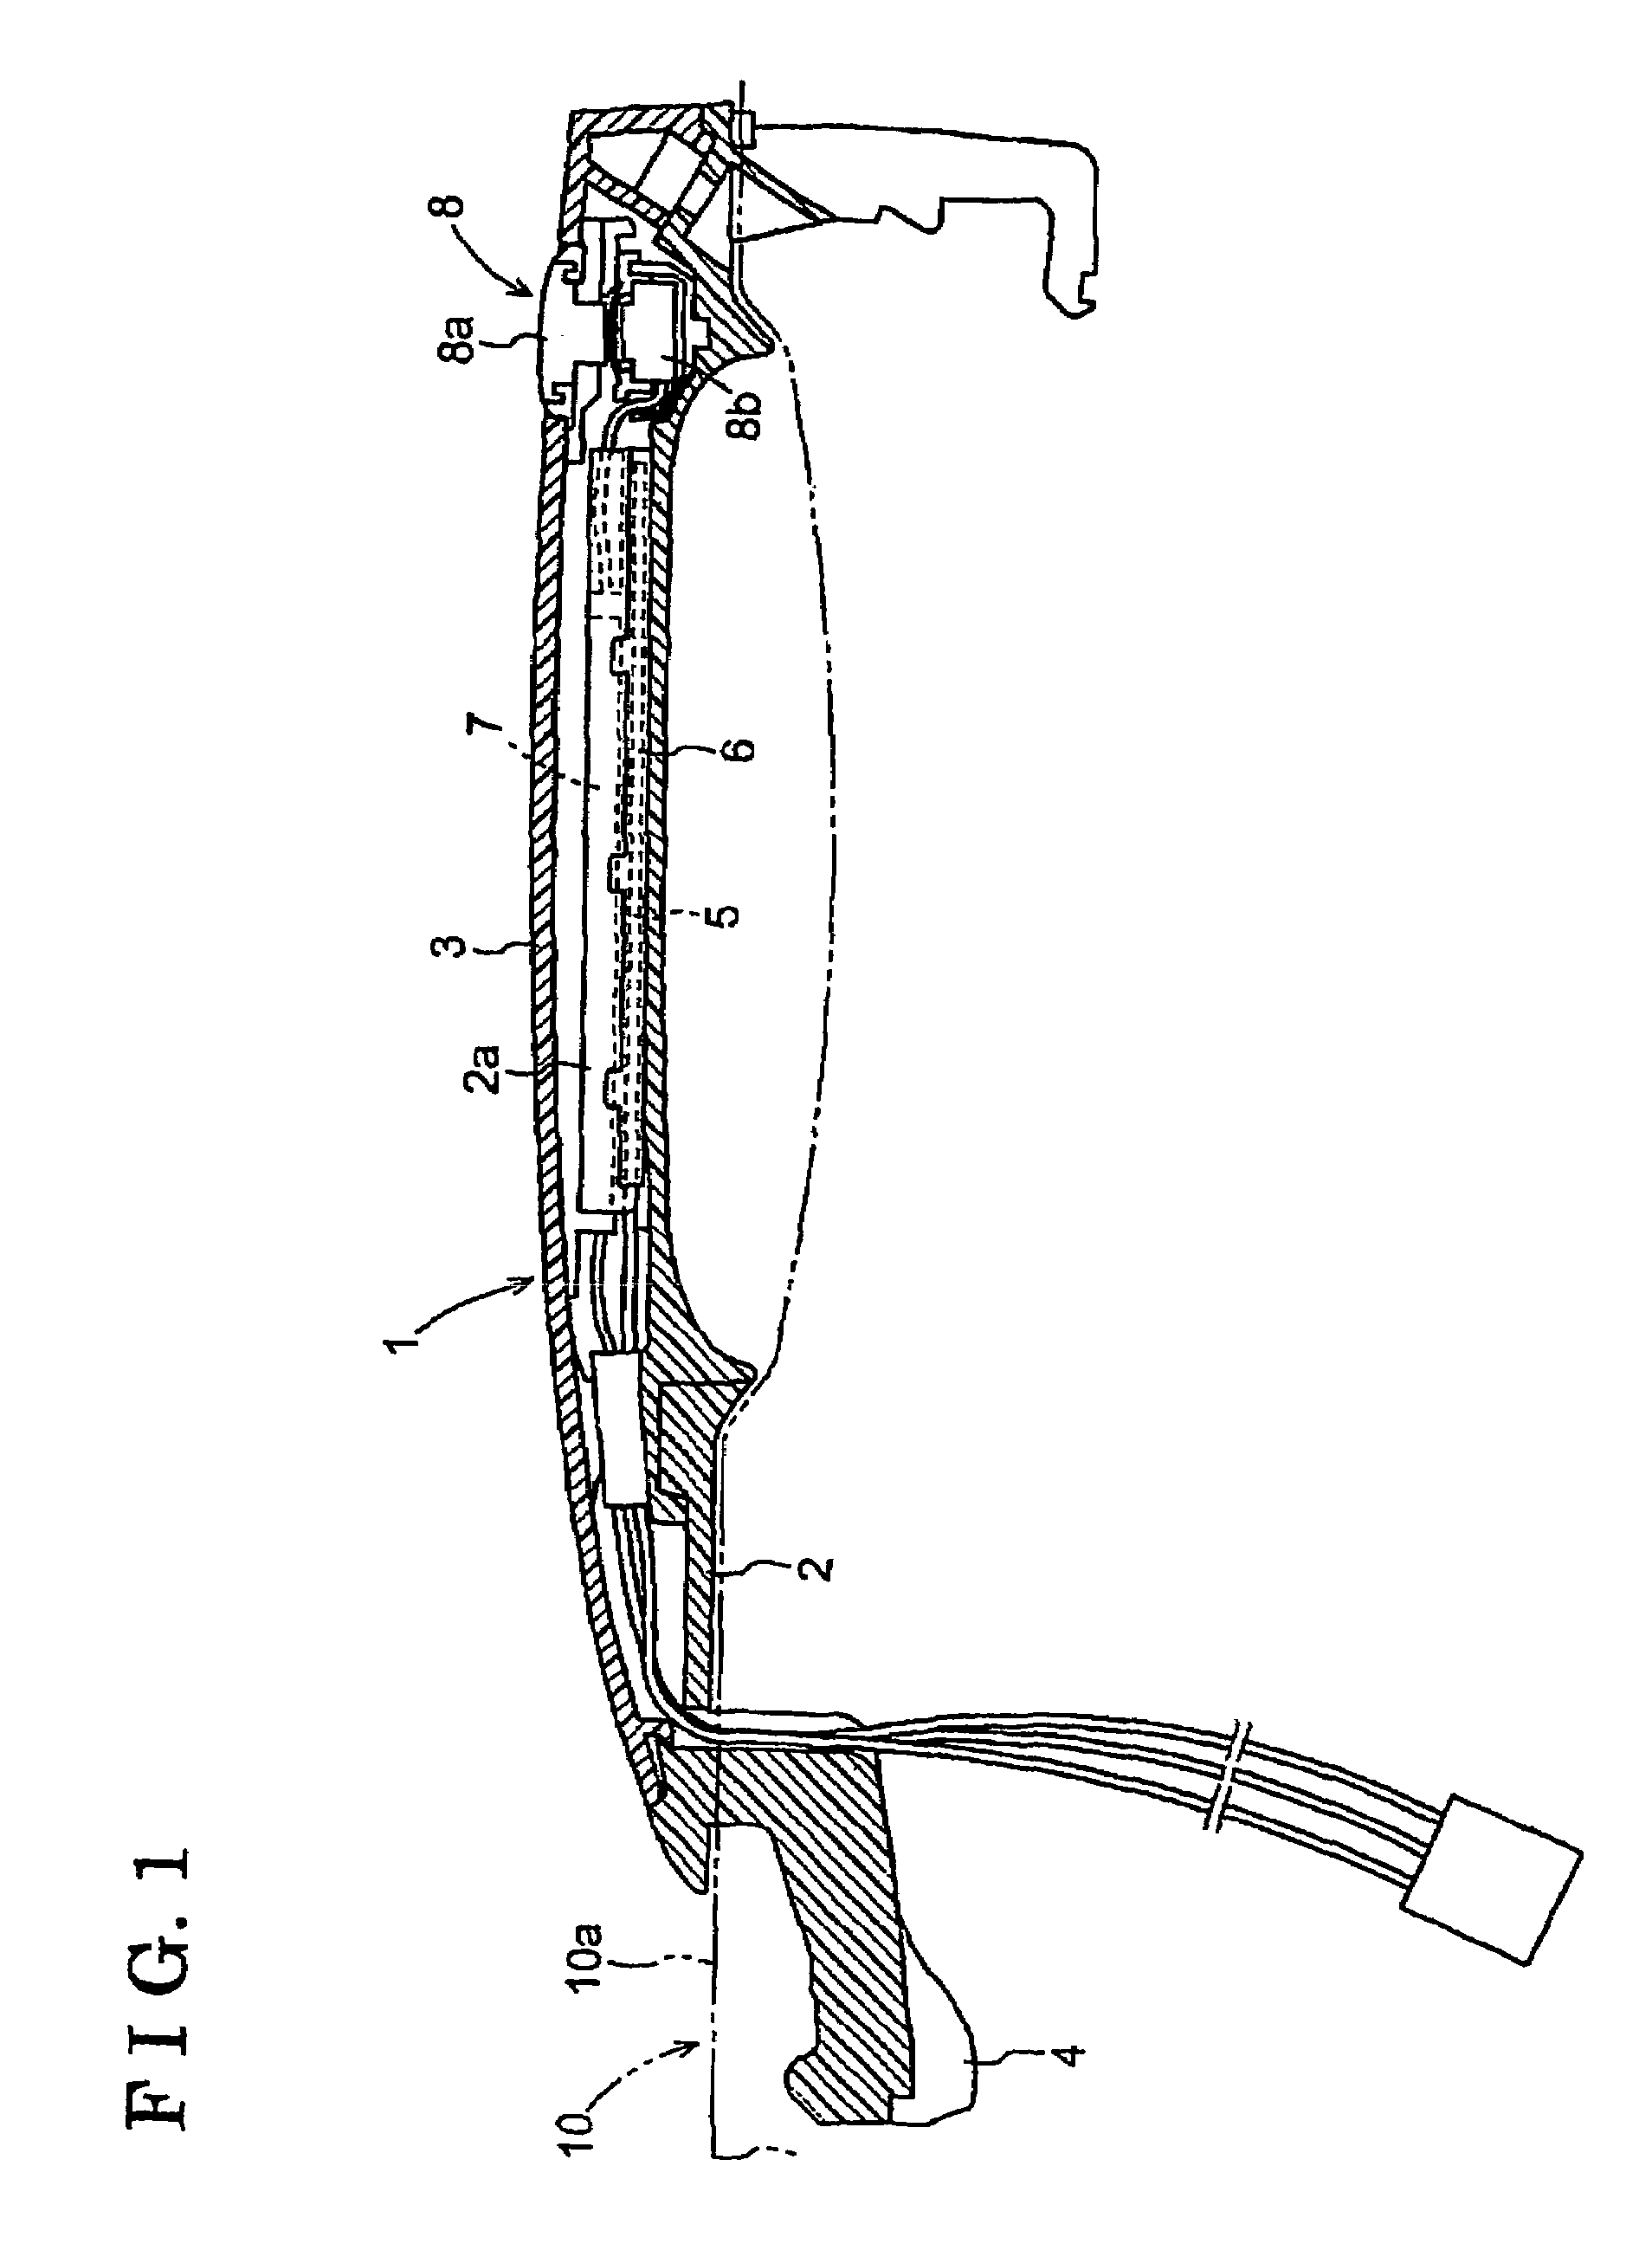 Human body detecting device for vehicles